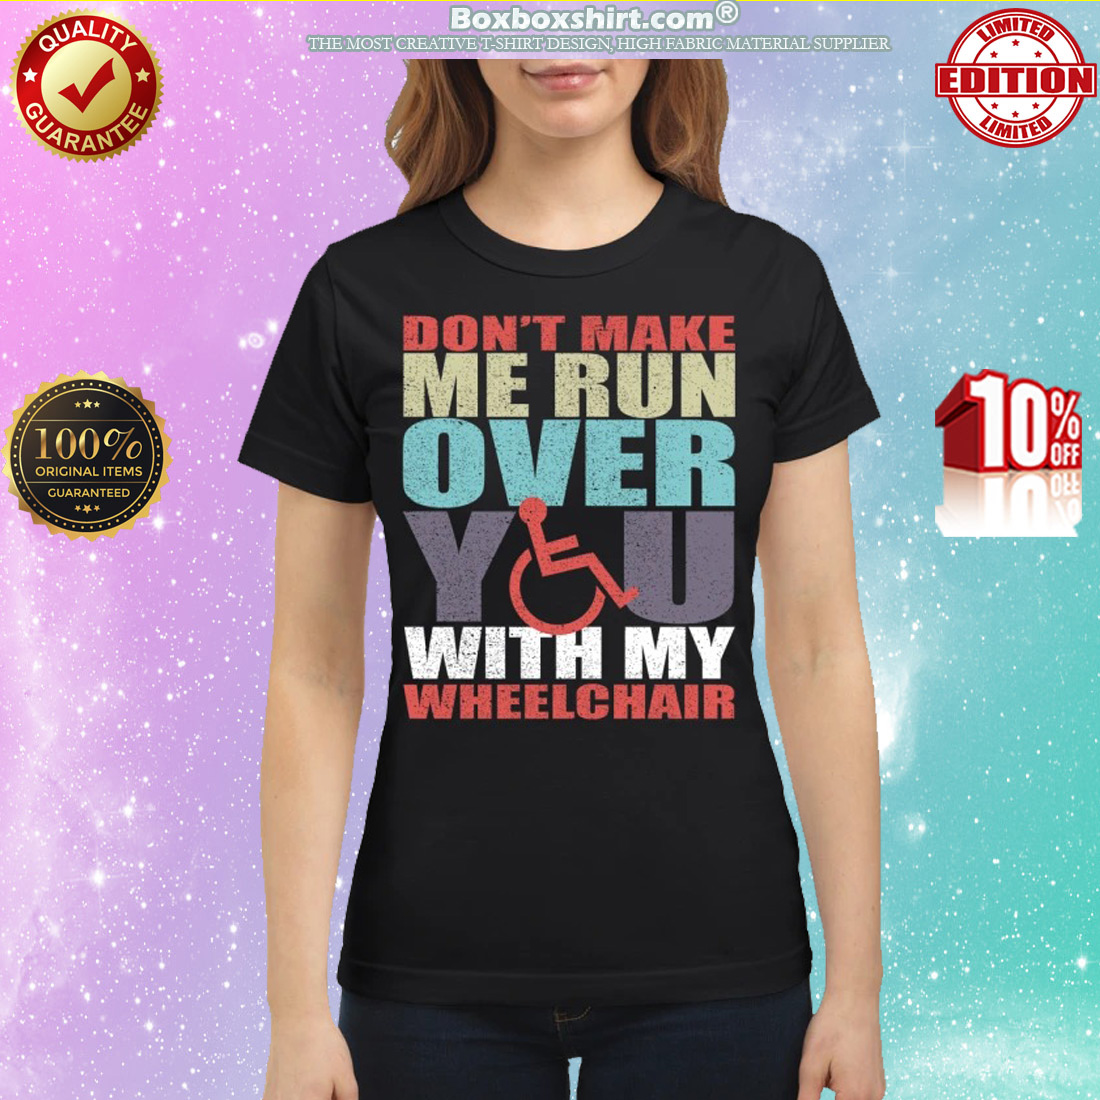 Don't make me run over you with my wheelchair classic shirt